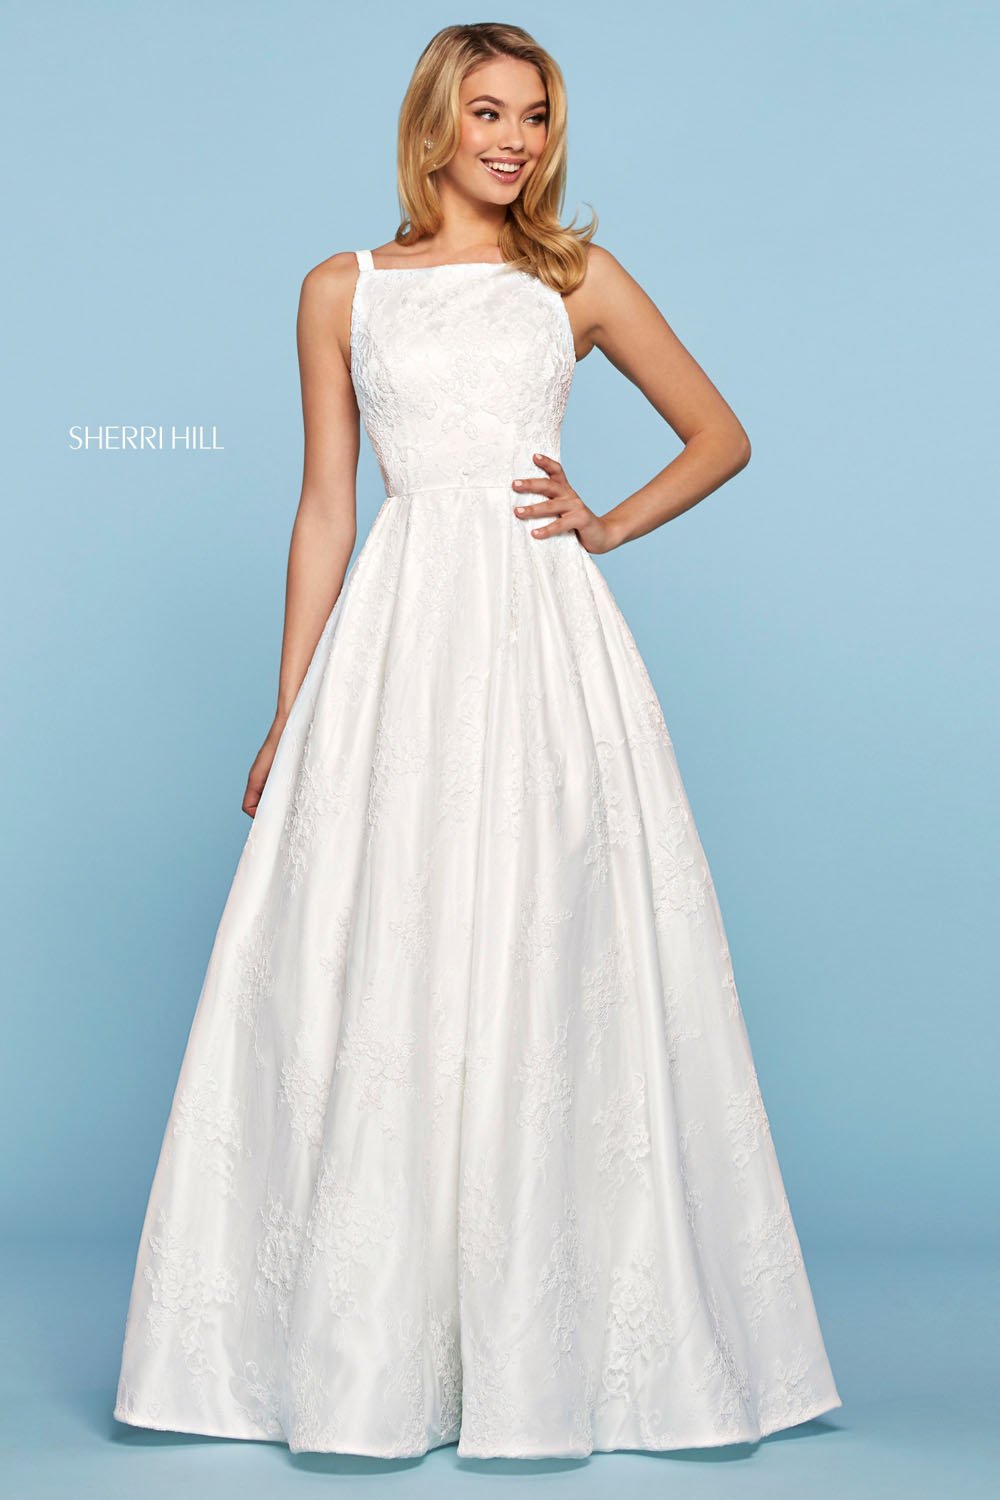 Sherri Hill 53462 dress images in these colors: Ivory, Red.